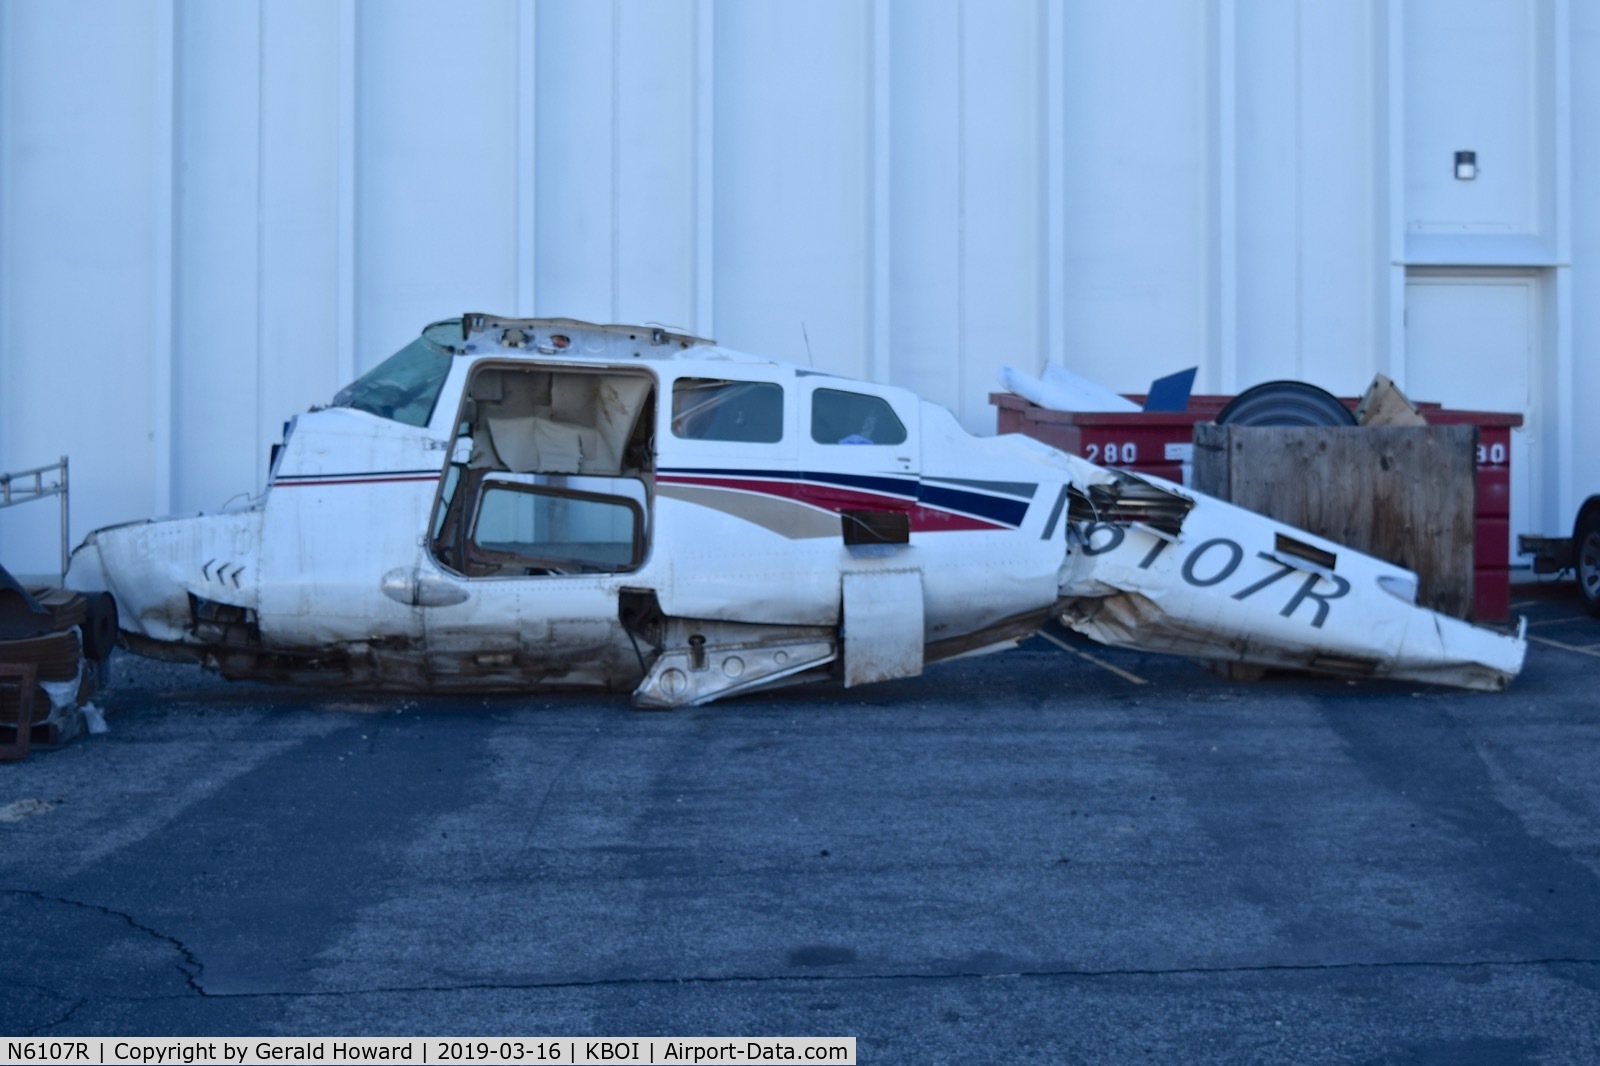 N6107R, 1965 Cessna T210F Turbo Centurion C/N T210-0007, Looks like a totaled aircraft. Unknown if any injuries.